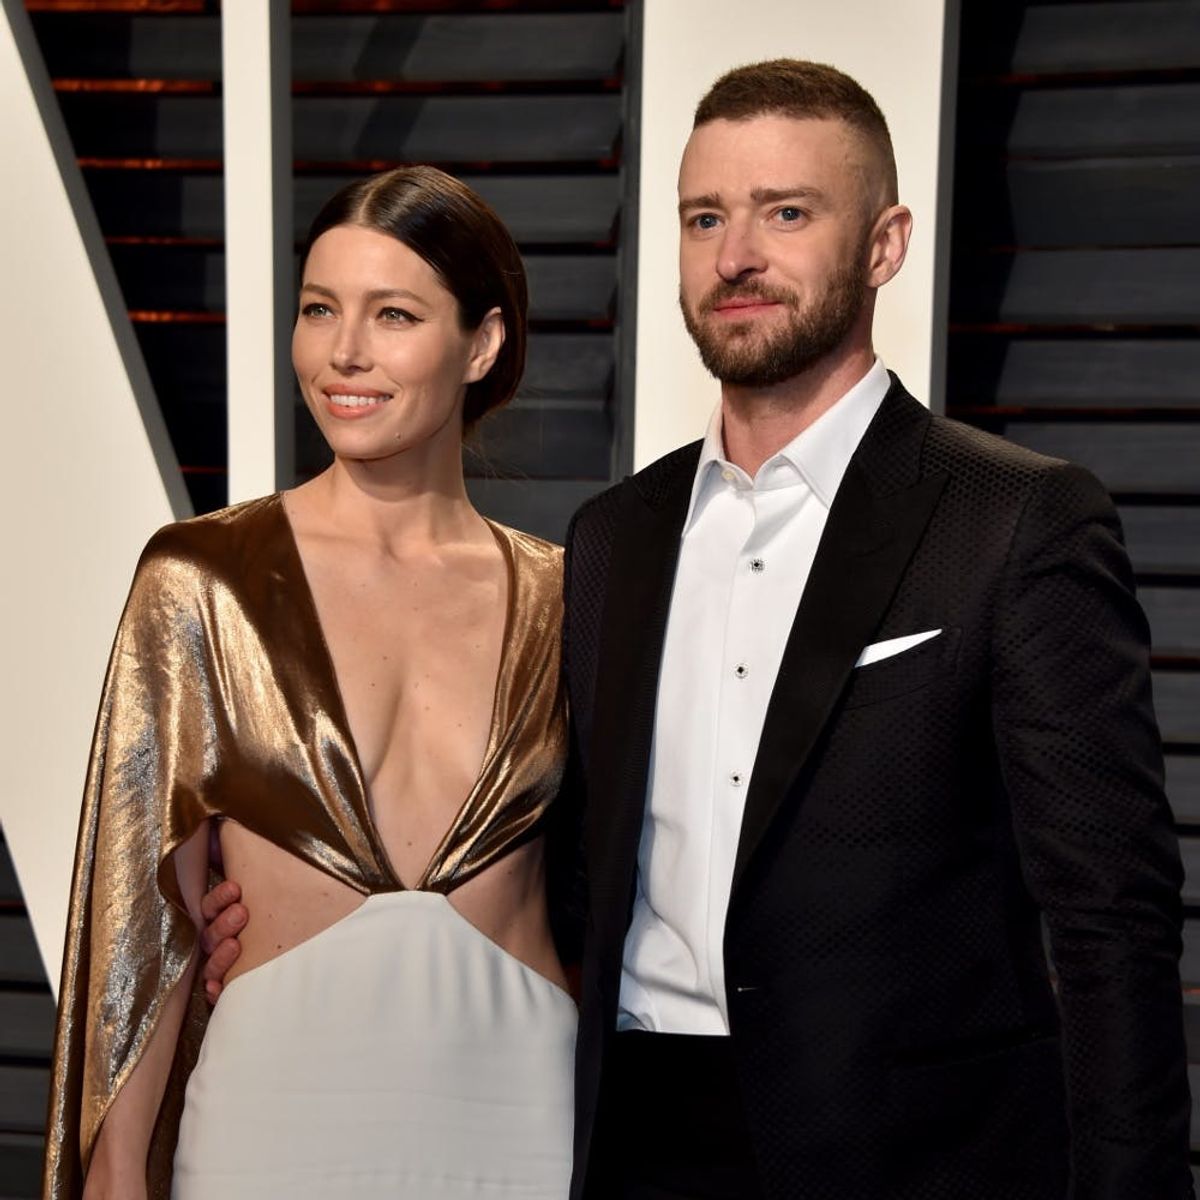 Justin Timberlake Posted THE Most Swoonworthy Mother’s Day Tribute to Jessica Biel